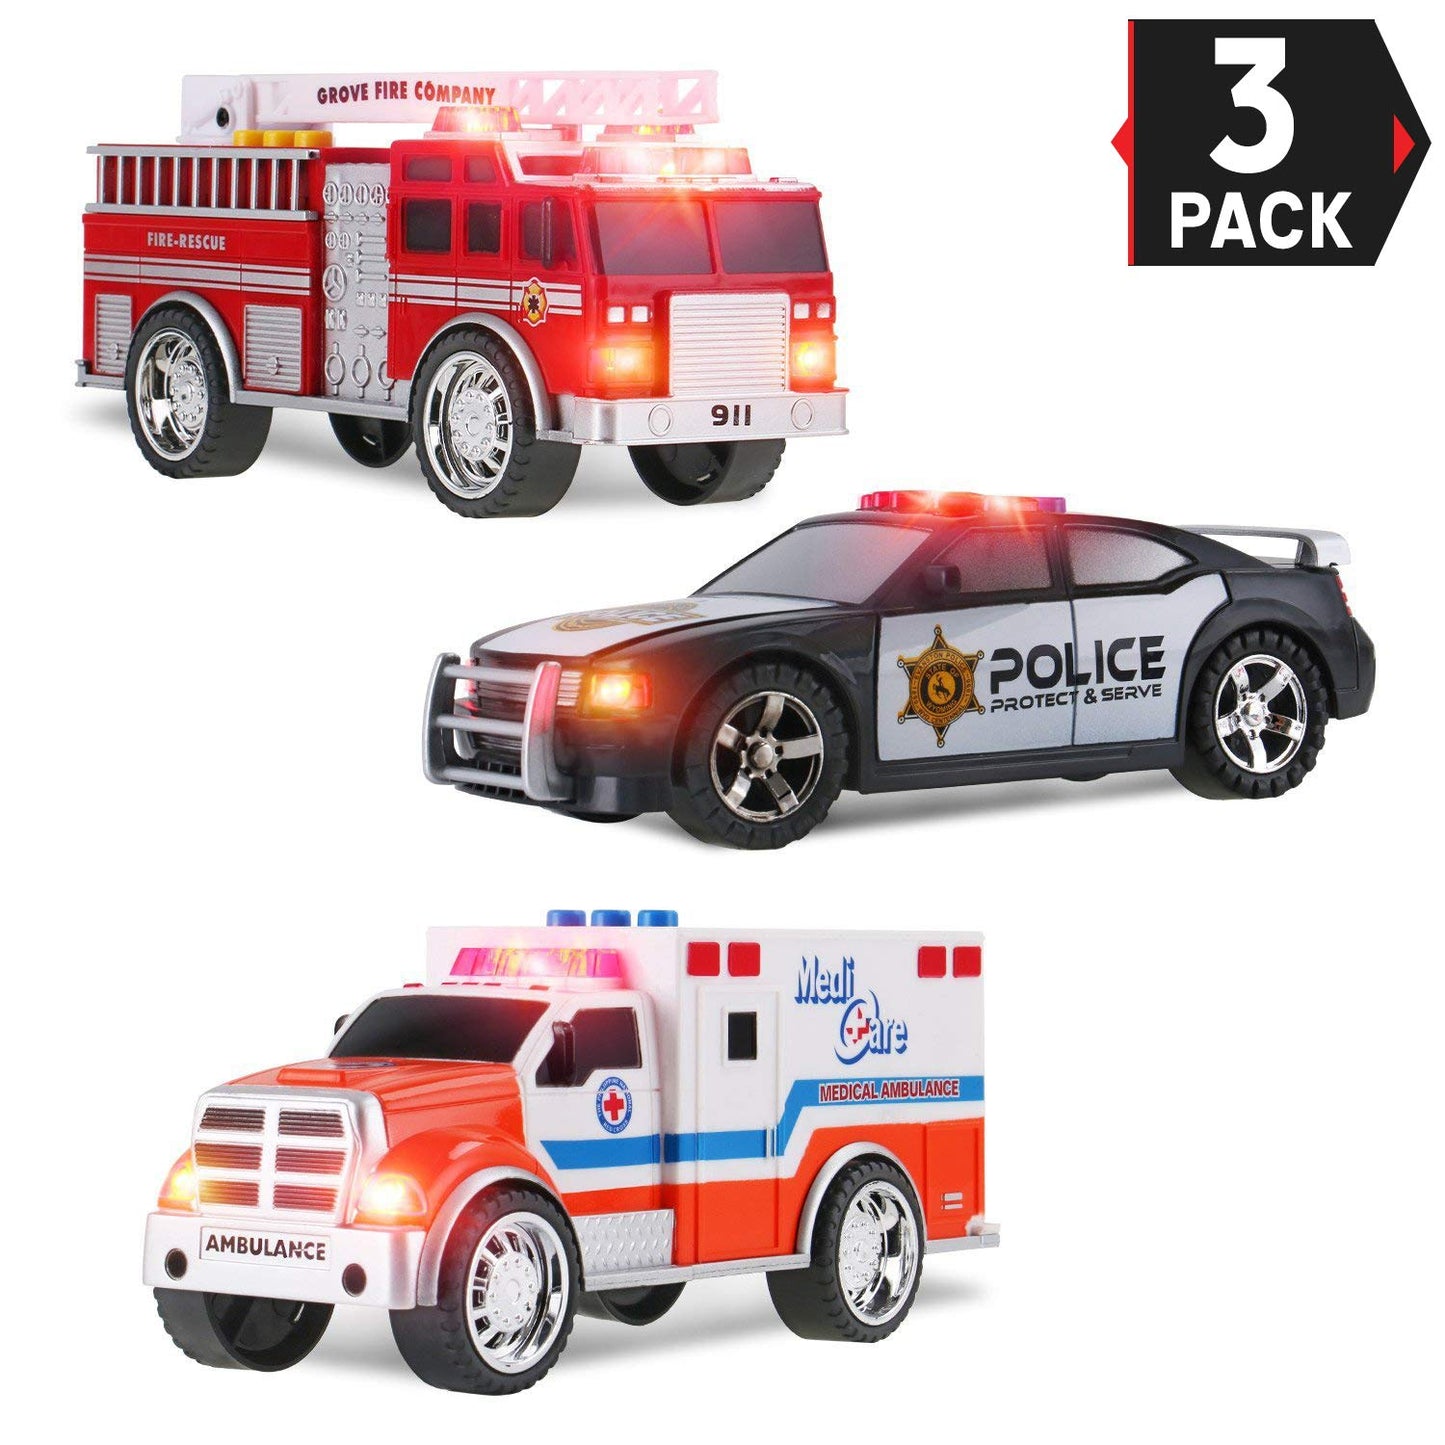 3-in-1 True Hero Vehicles Kids Toy Cars PlaySet | 3-Button LED Light & Sound Effects (Emergency Vehicles)